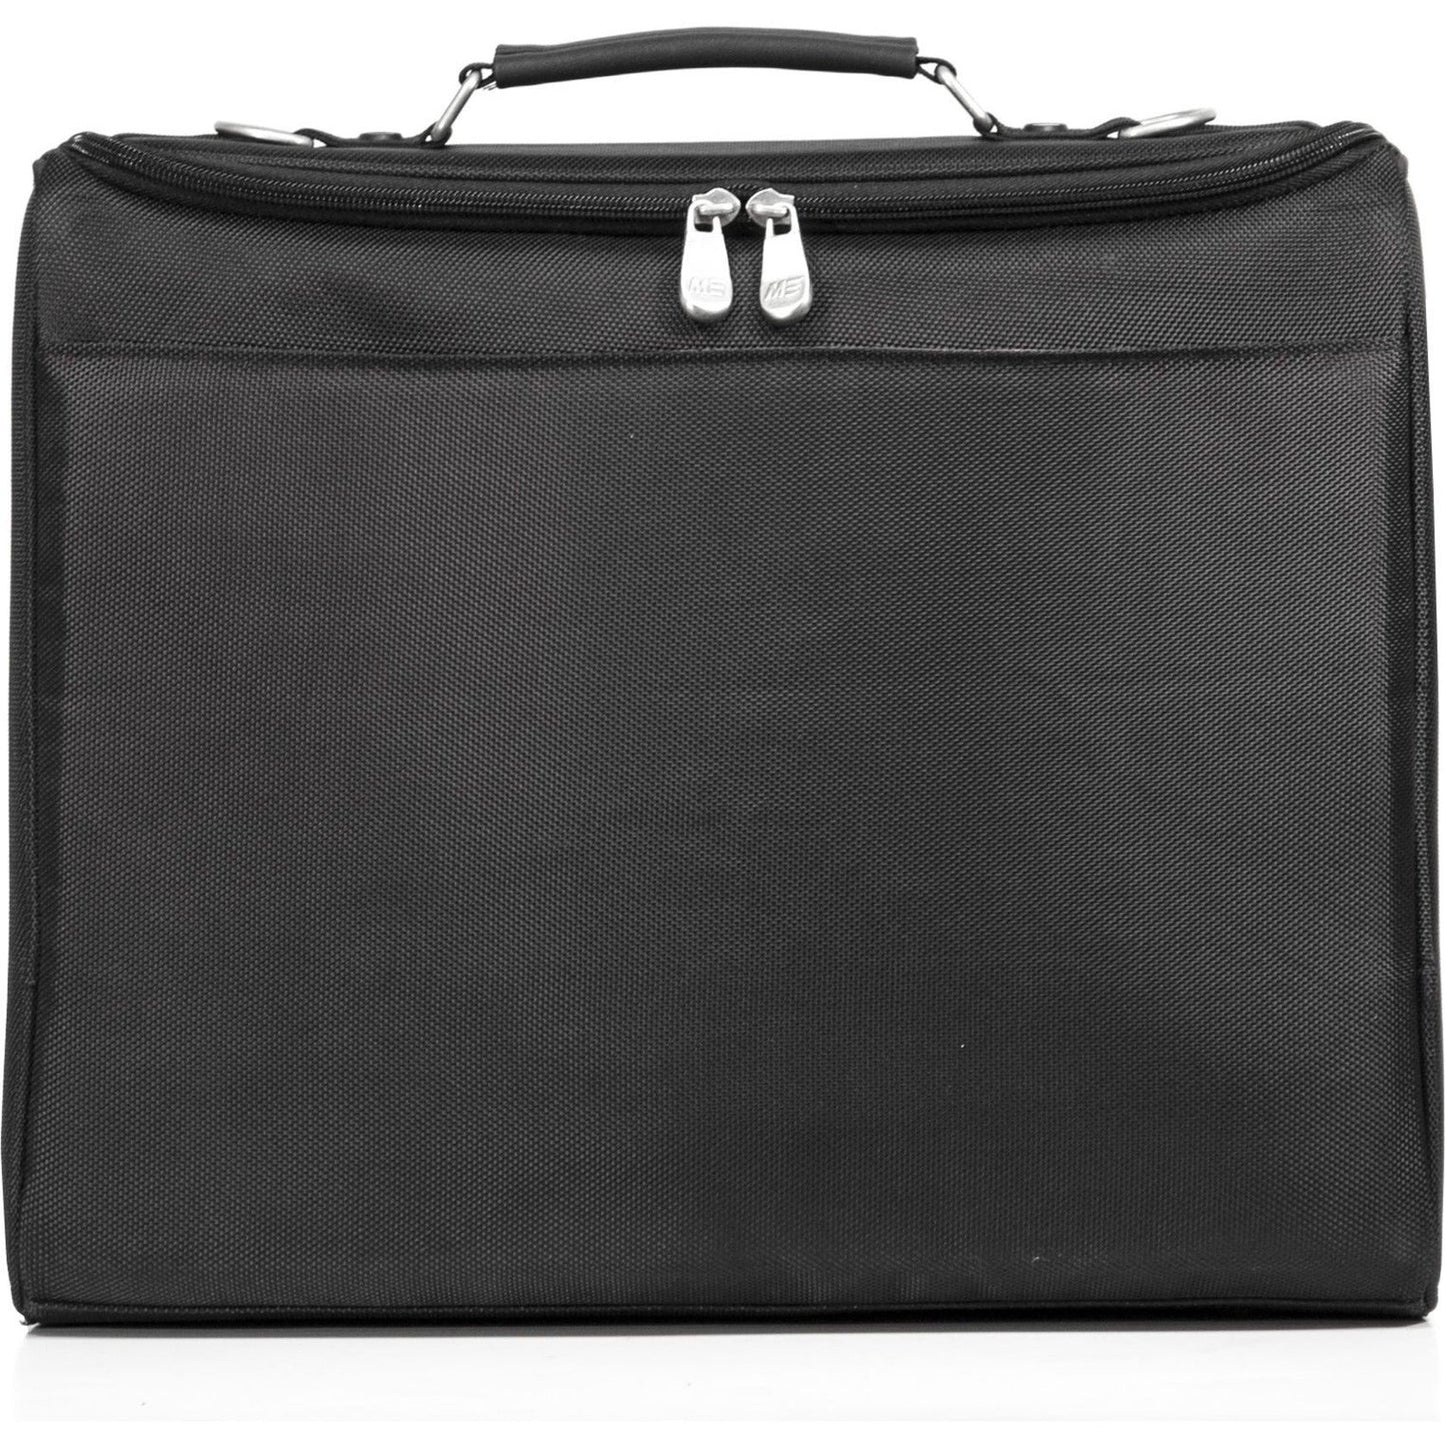 Mobile Edge Express Carrying Case (Briefcase) for 11.6" Chromebook - Black